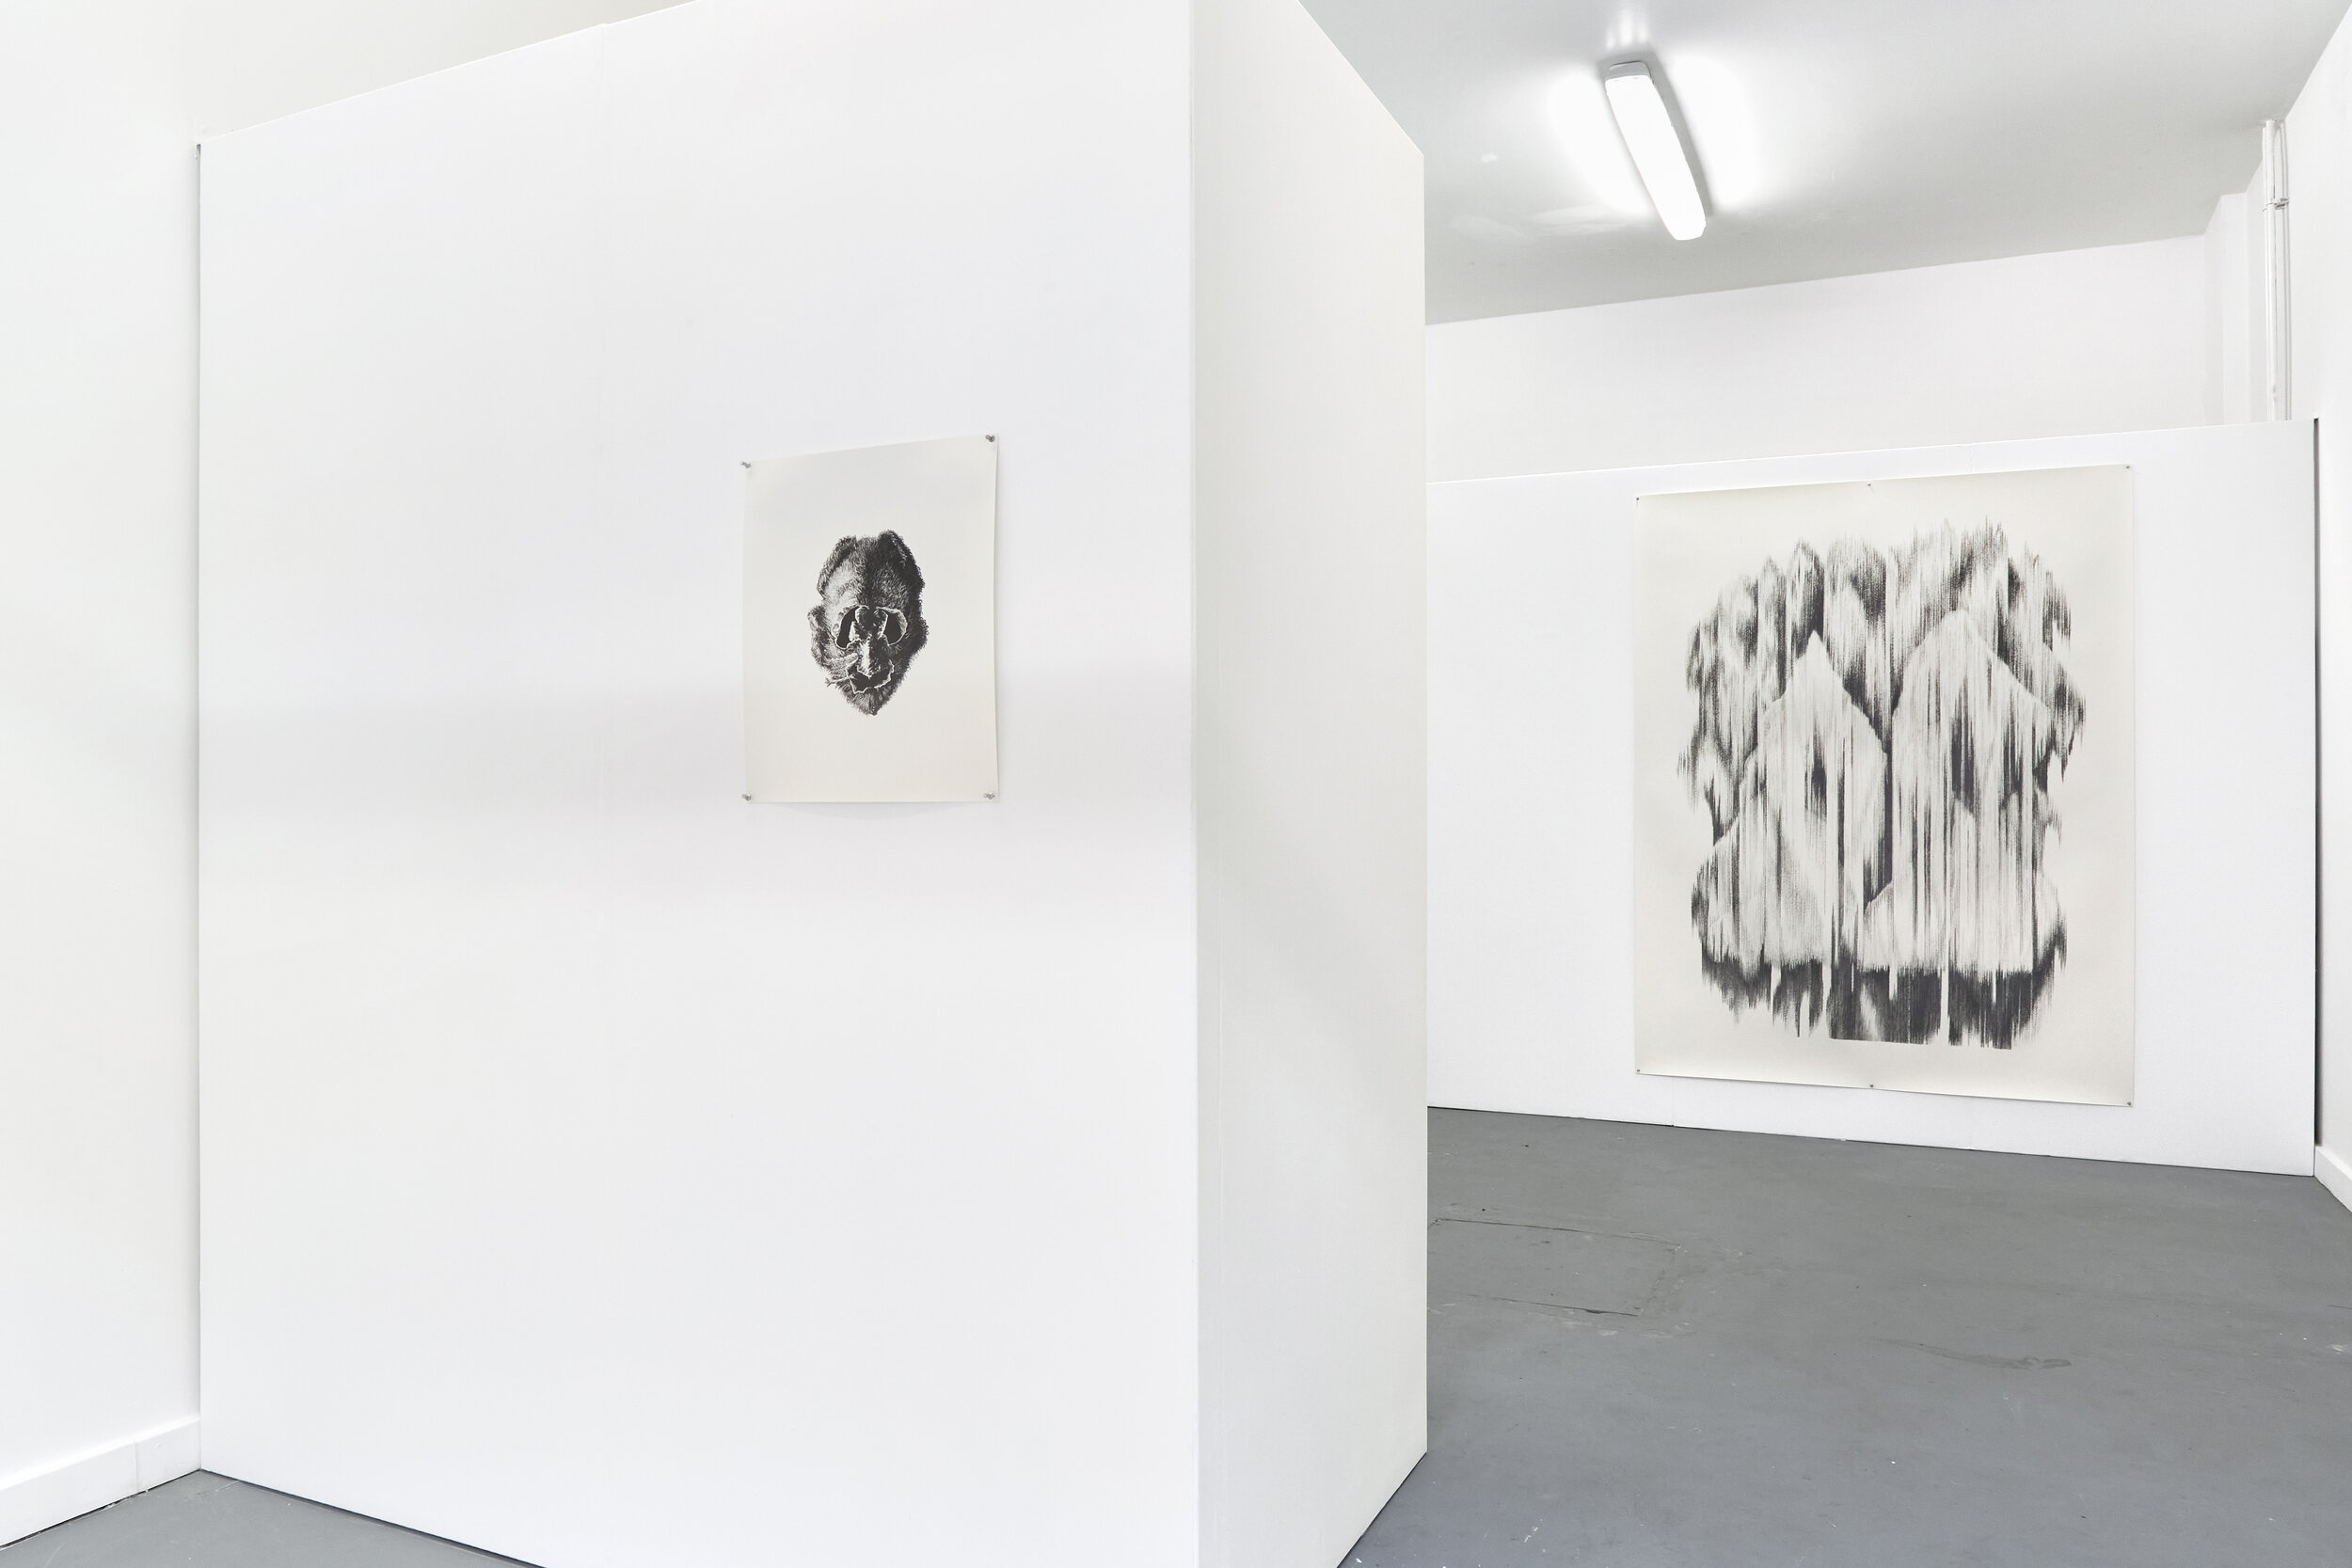  Installation view of ‘Floating Heads’ exhibition at Xxijra Hii project space in Deptford, London, 2021. On the left: ‘Floating Head’, pencil on paper, 50 x 42.5cm; on the right: ‘Alive is Afoot’, pencil on paper, 214.5 x 162.5cm, both from 2021.  